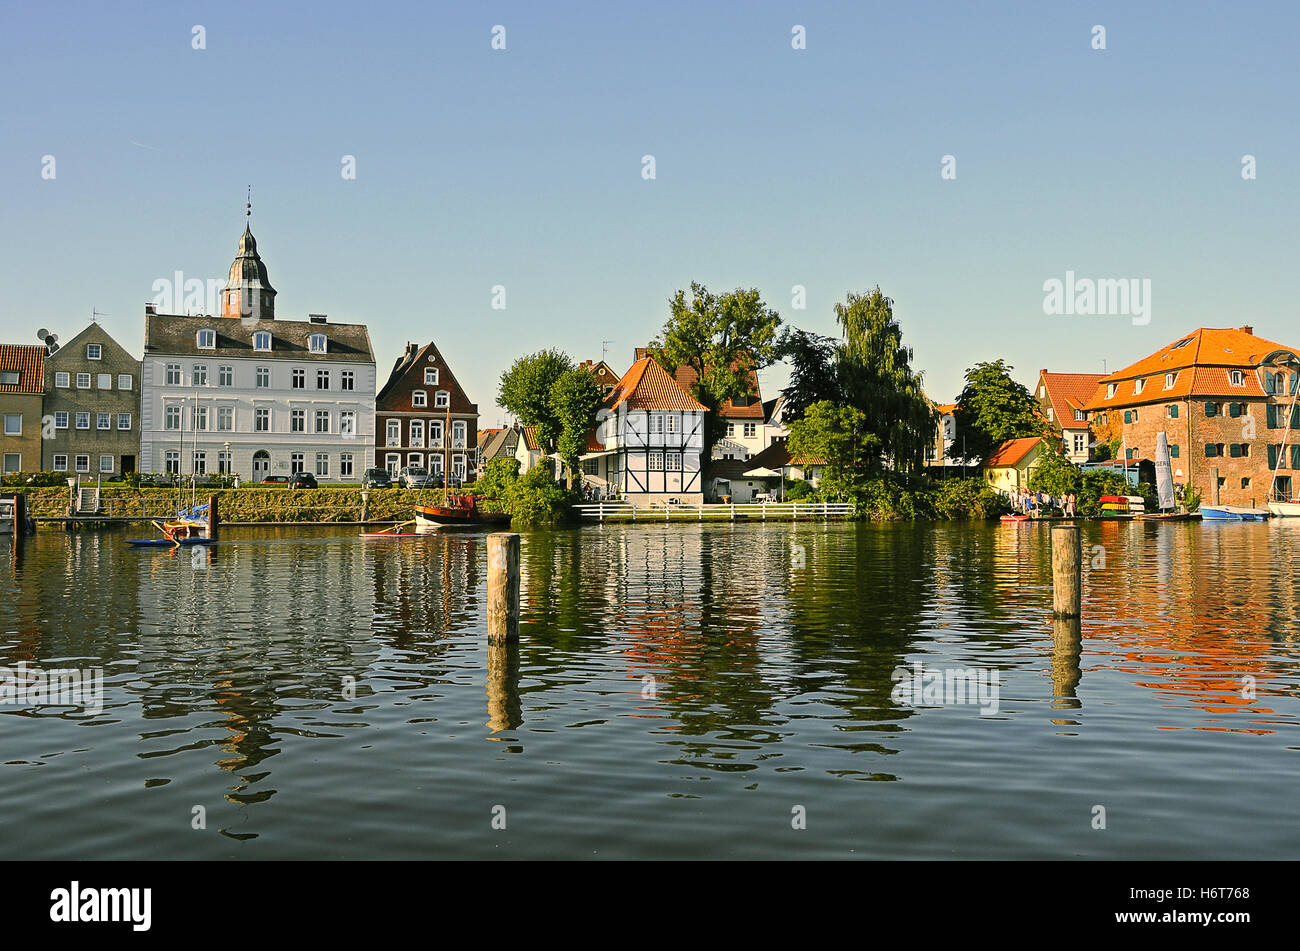 houses, harbor, mirroring, harbours, style of construction, architecture, Stock Photo